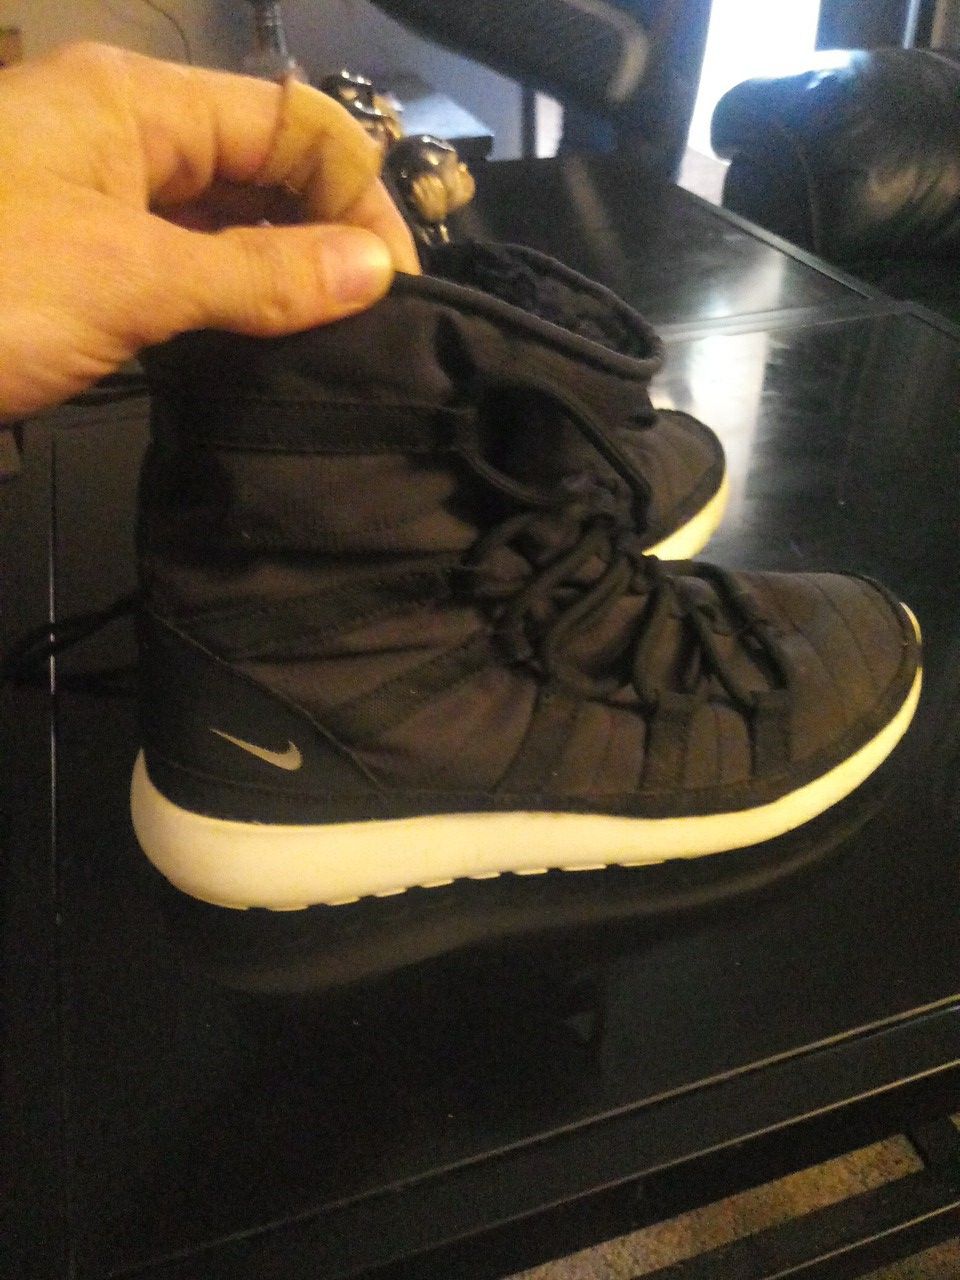 Nike high top sneaker boots